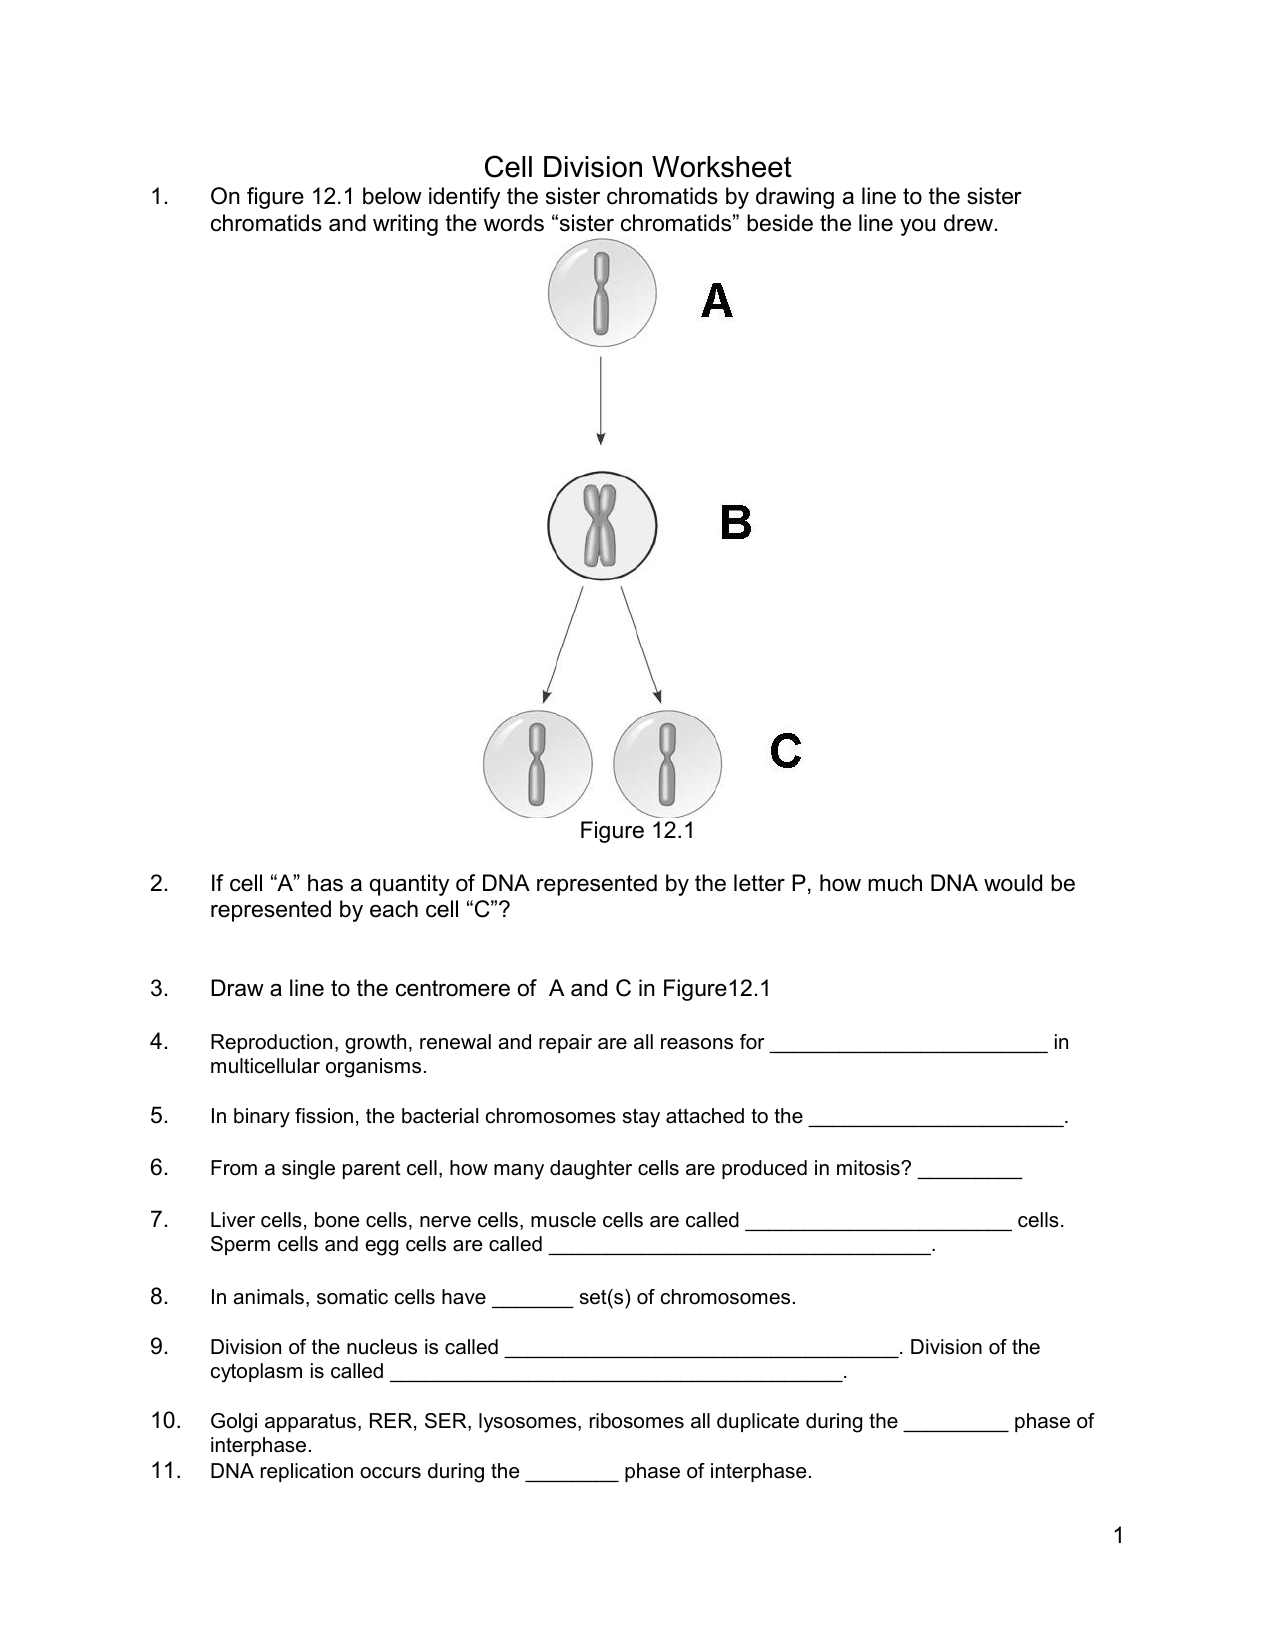 Cell Division Worksheet PDF Pertaining To Cell Cycle Worksheet Answer Key